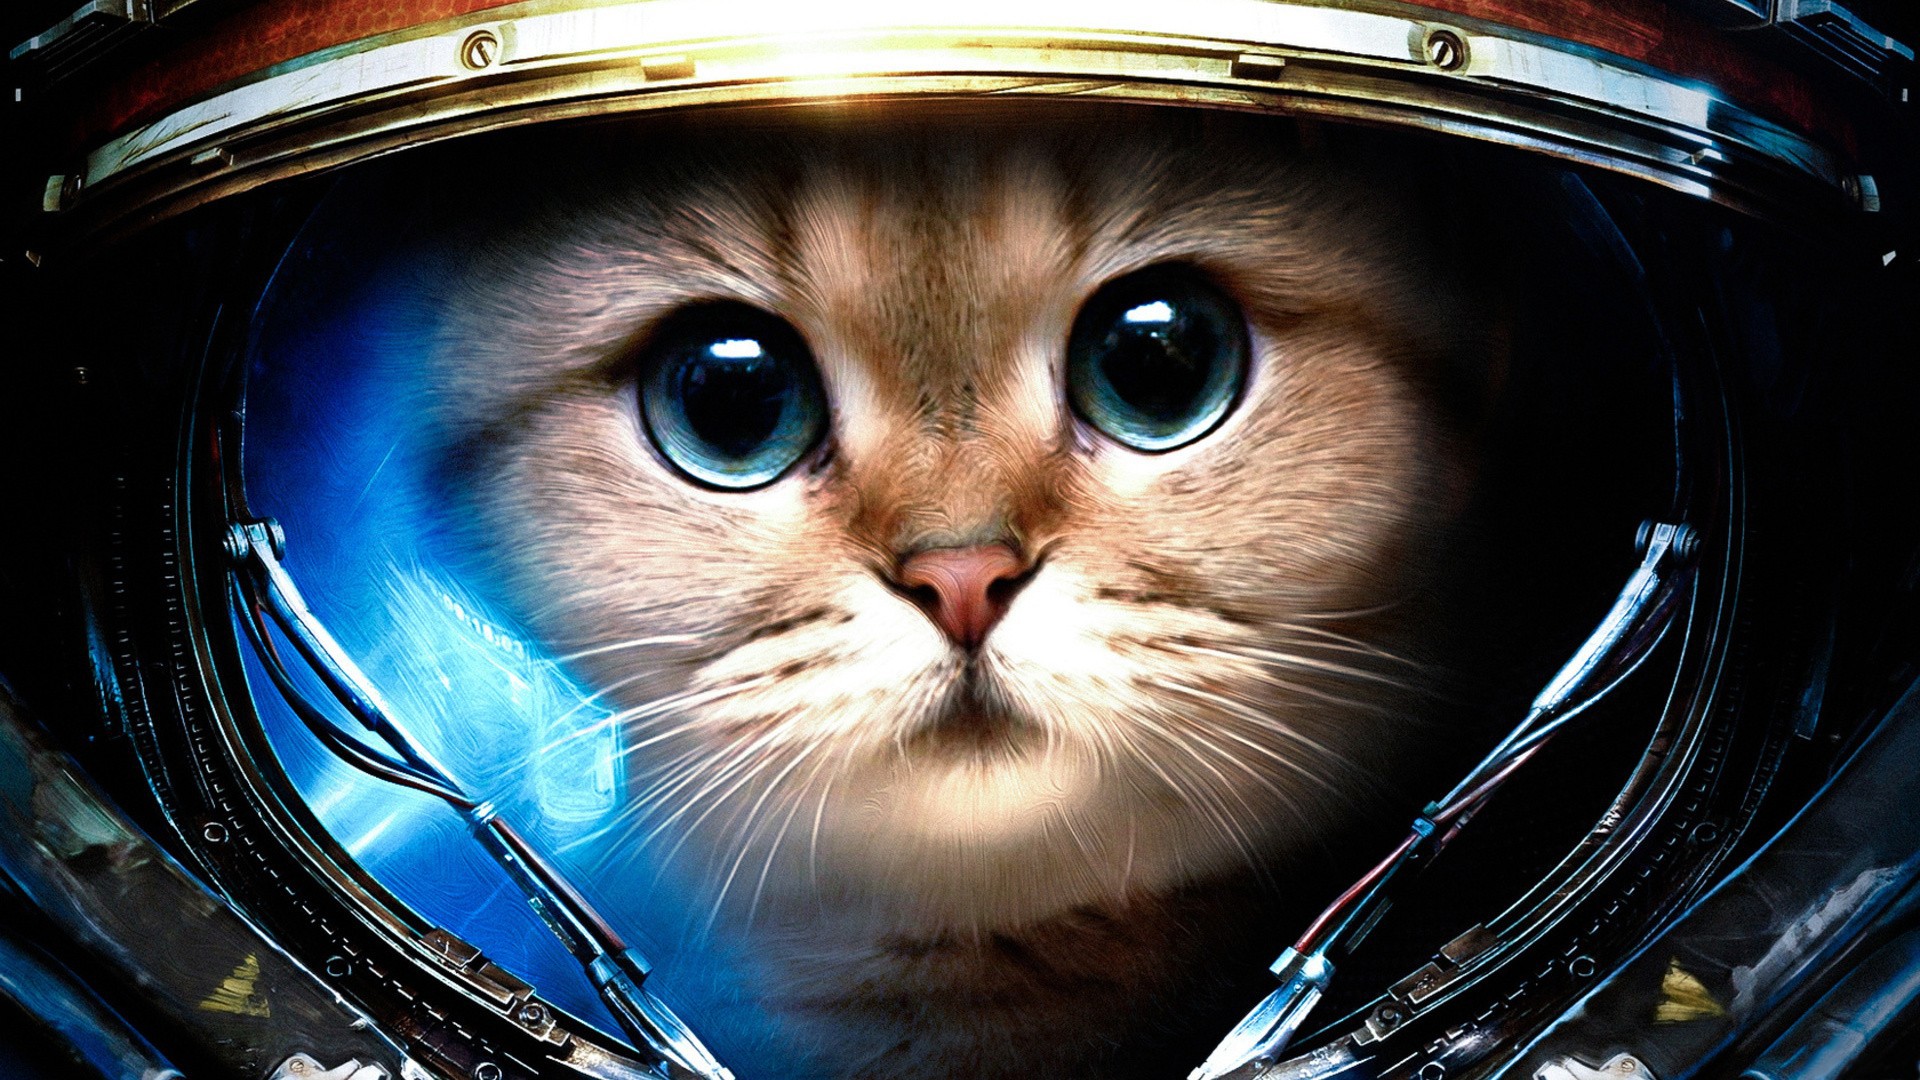 Cat astronaut wallpapers and images   wallpapers pictures photos 1920x1080